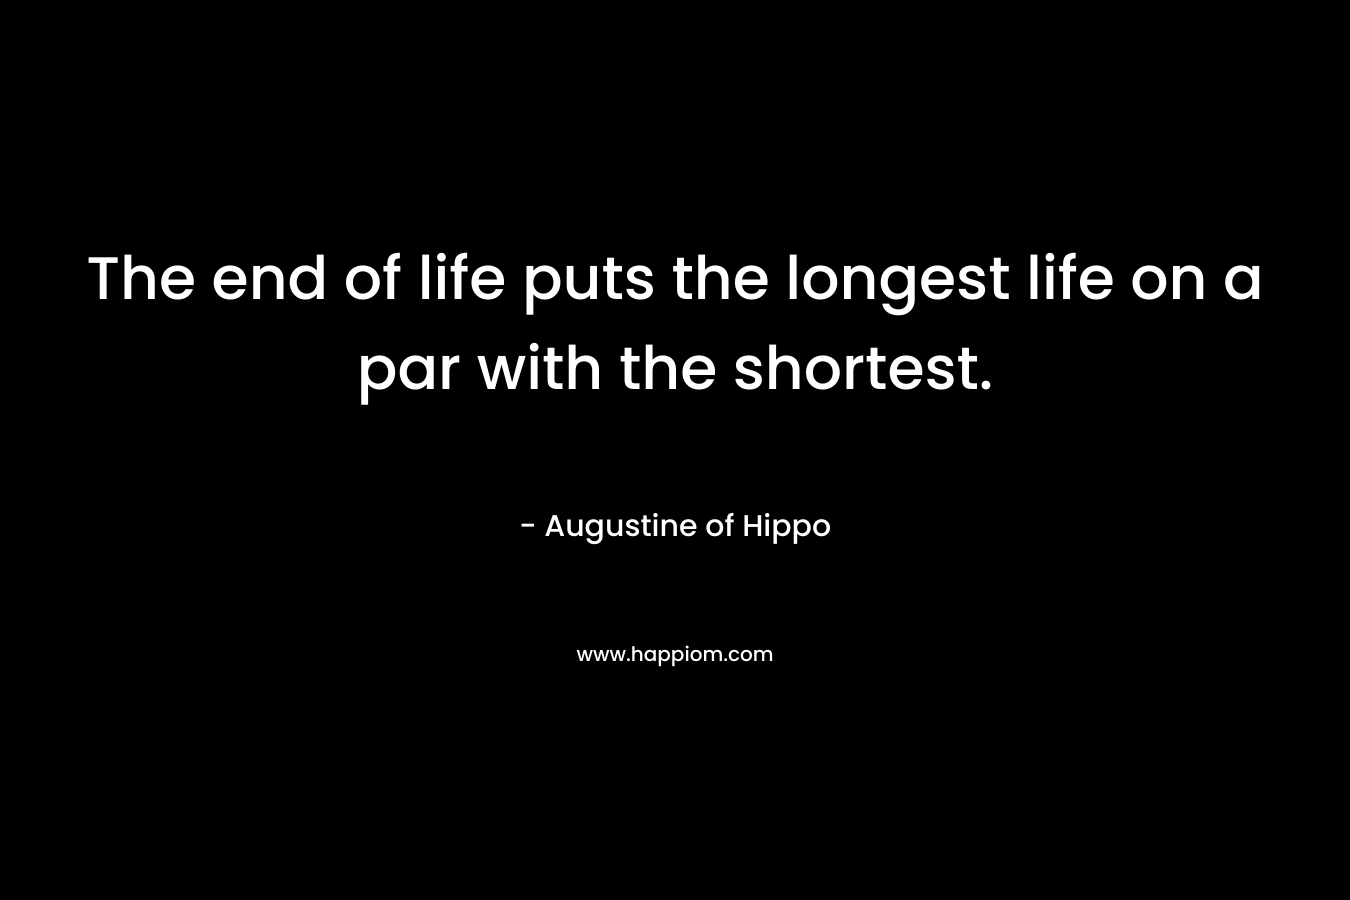 The end of life puts the longest life on a par with the shortest.